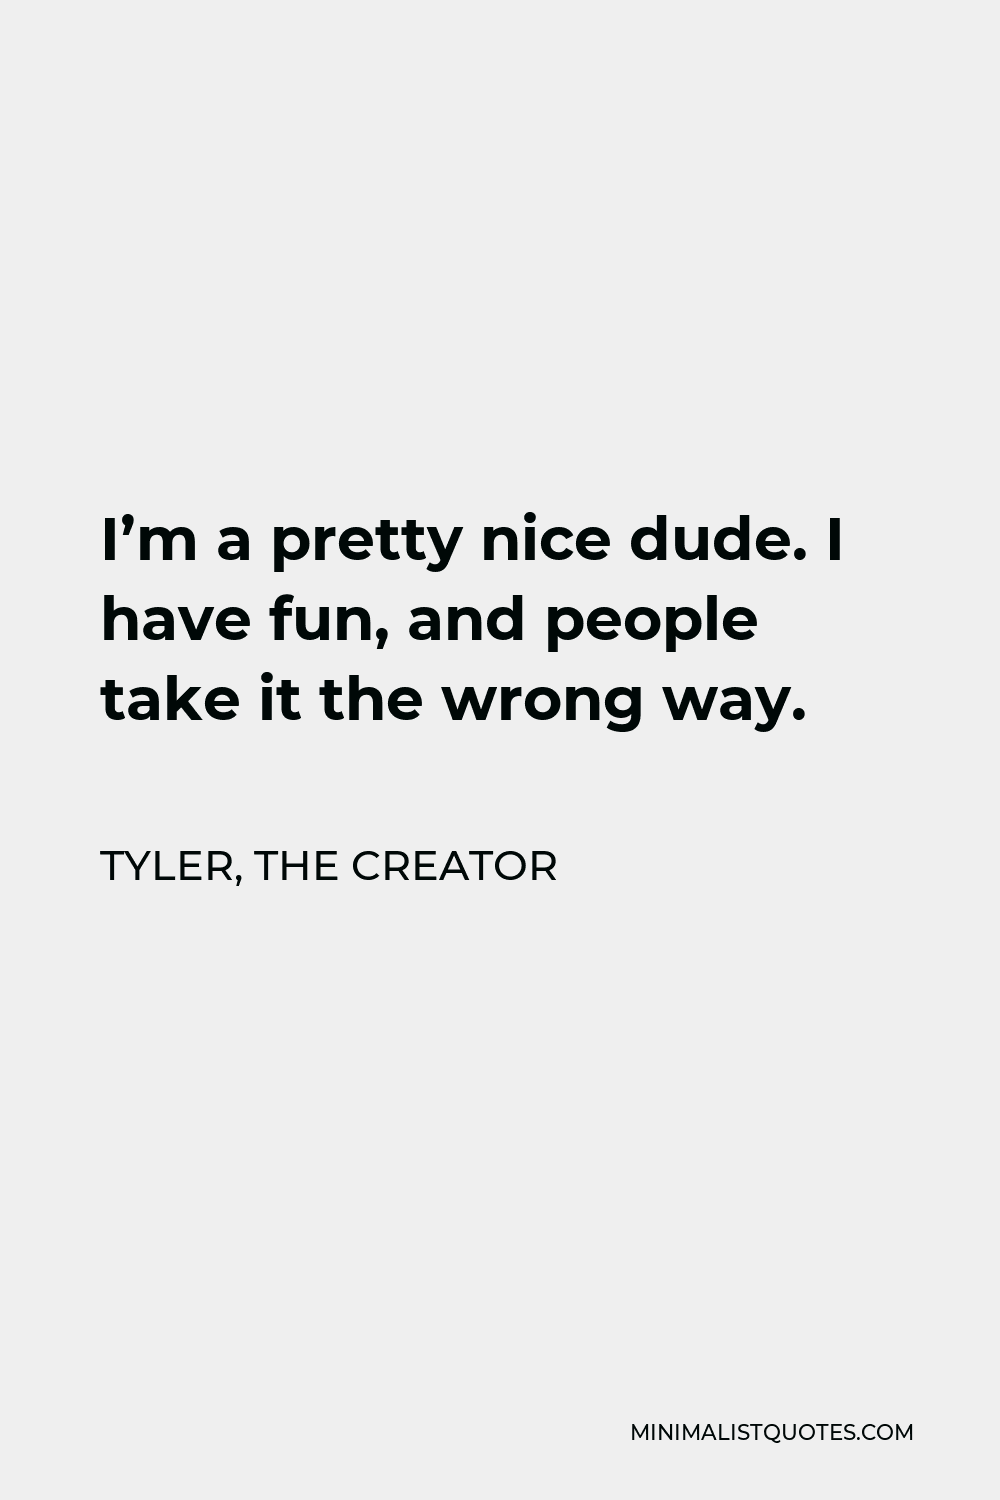 Tyler, the Creator Quote - I’m a pretty nice dude. I have fun, and people take it the wrong way.